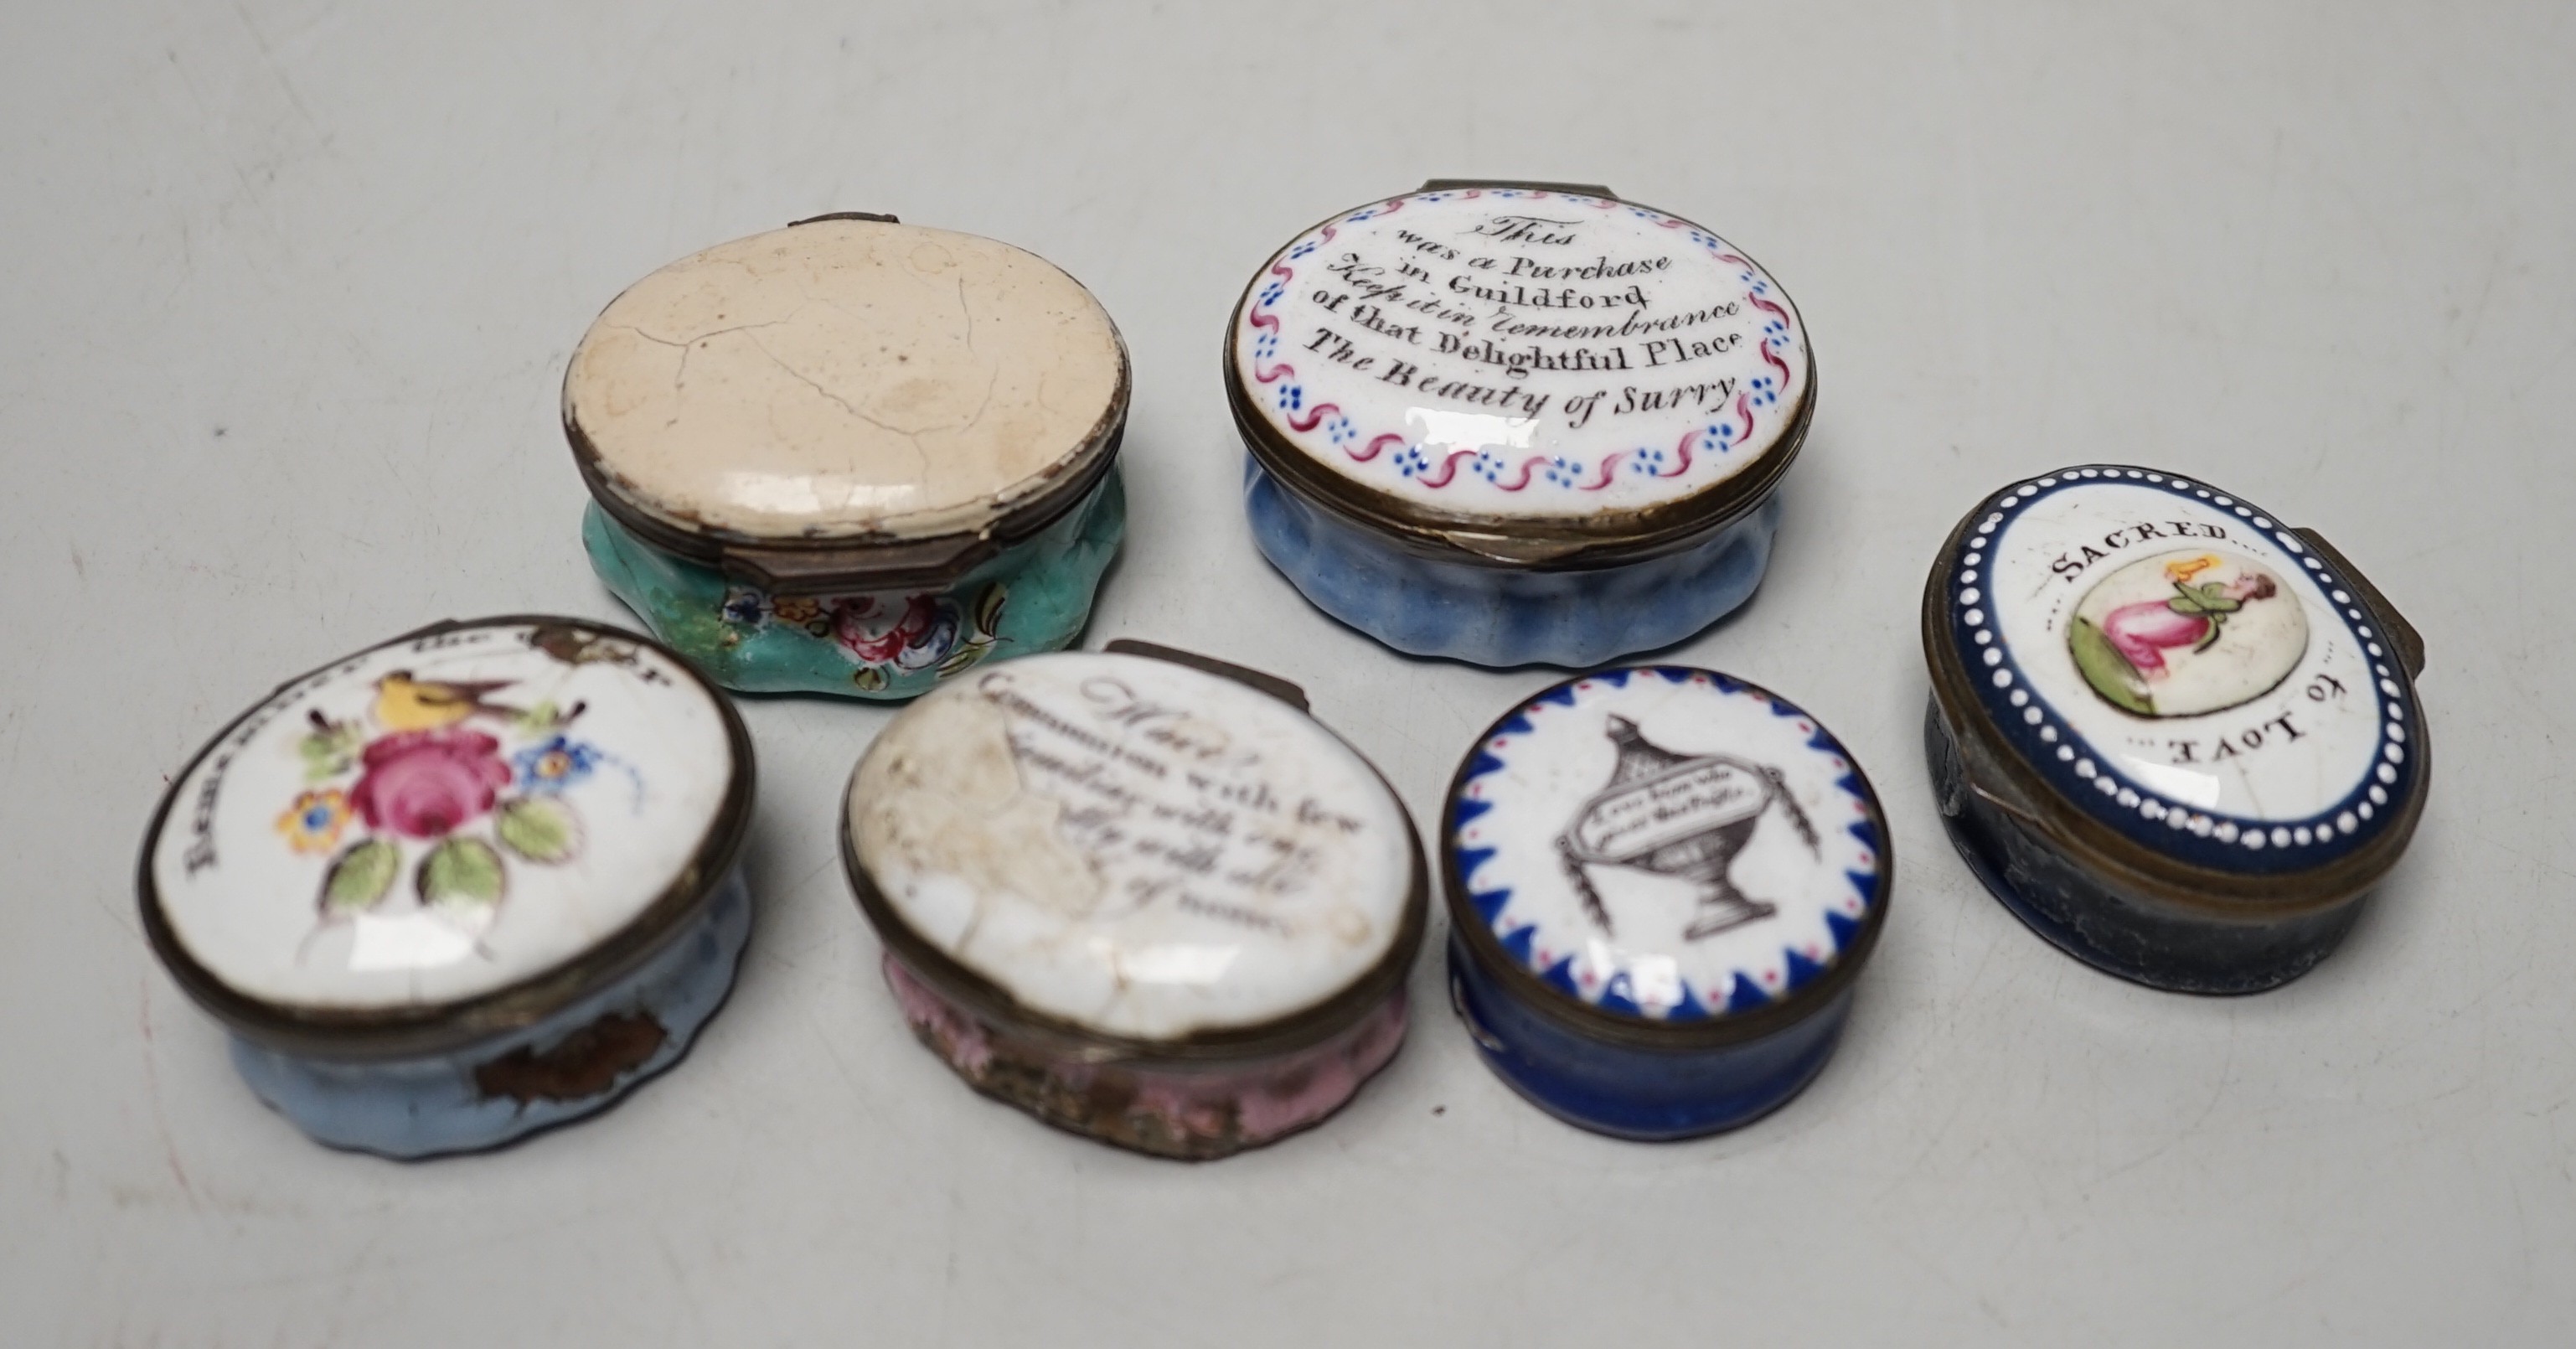 Six early 19th century South Staffordshire enamel patch boxes.